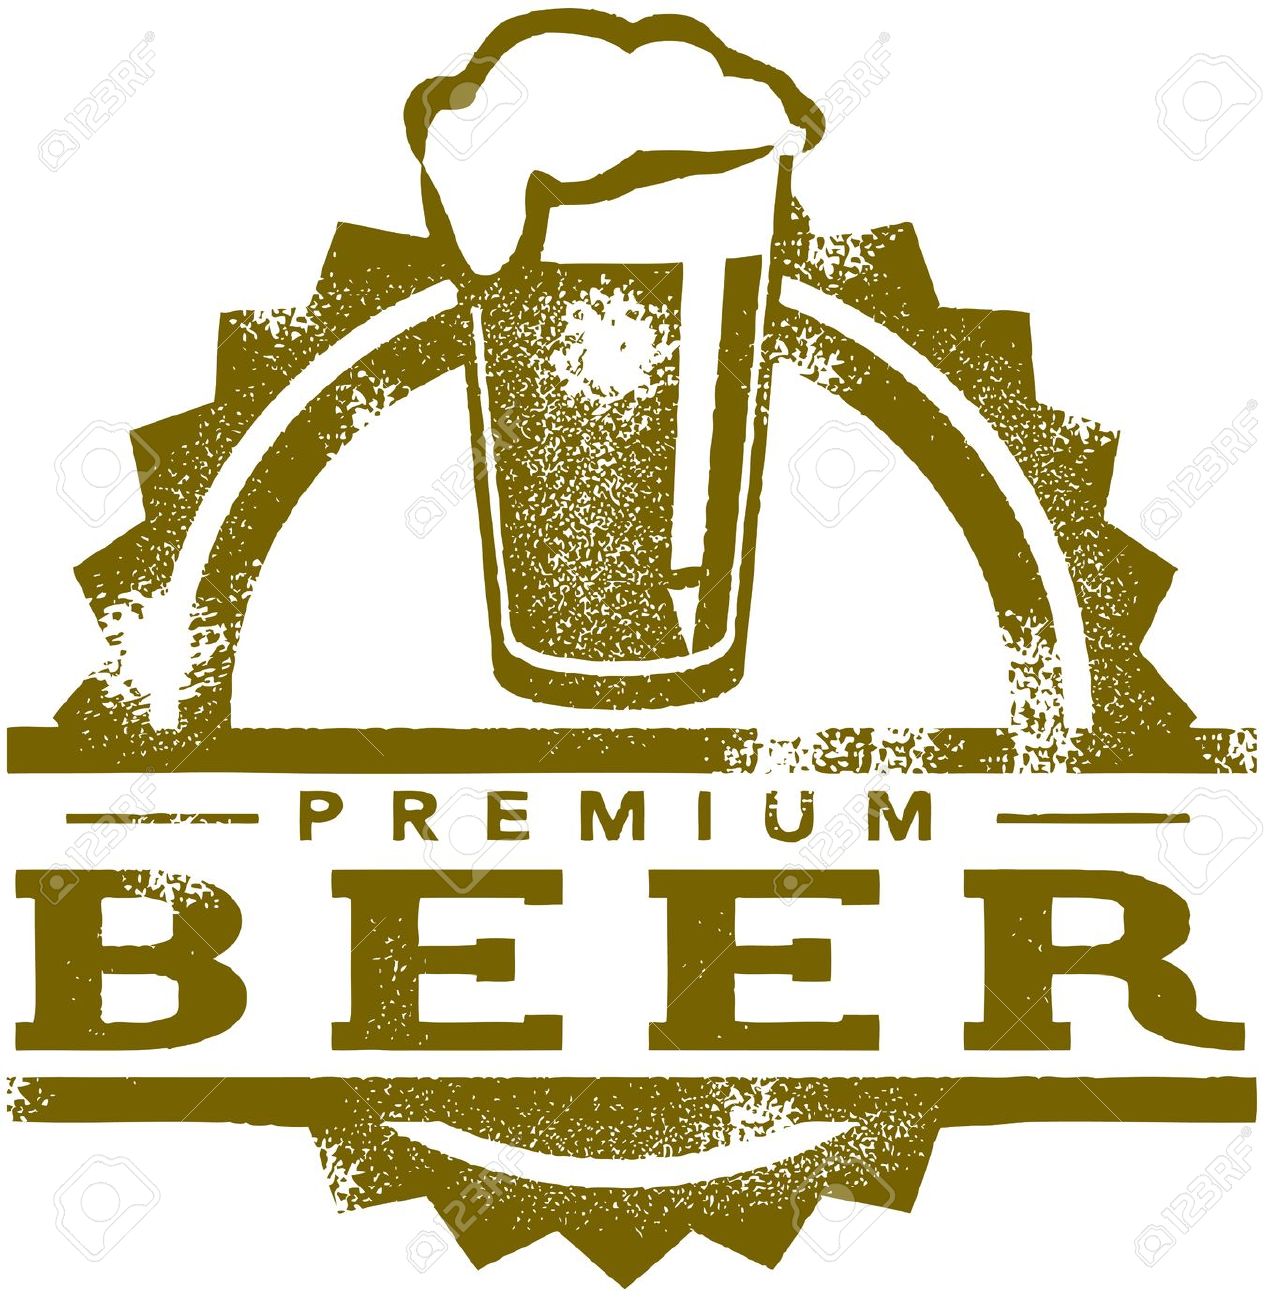 free beer clipart images - photo #44